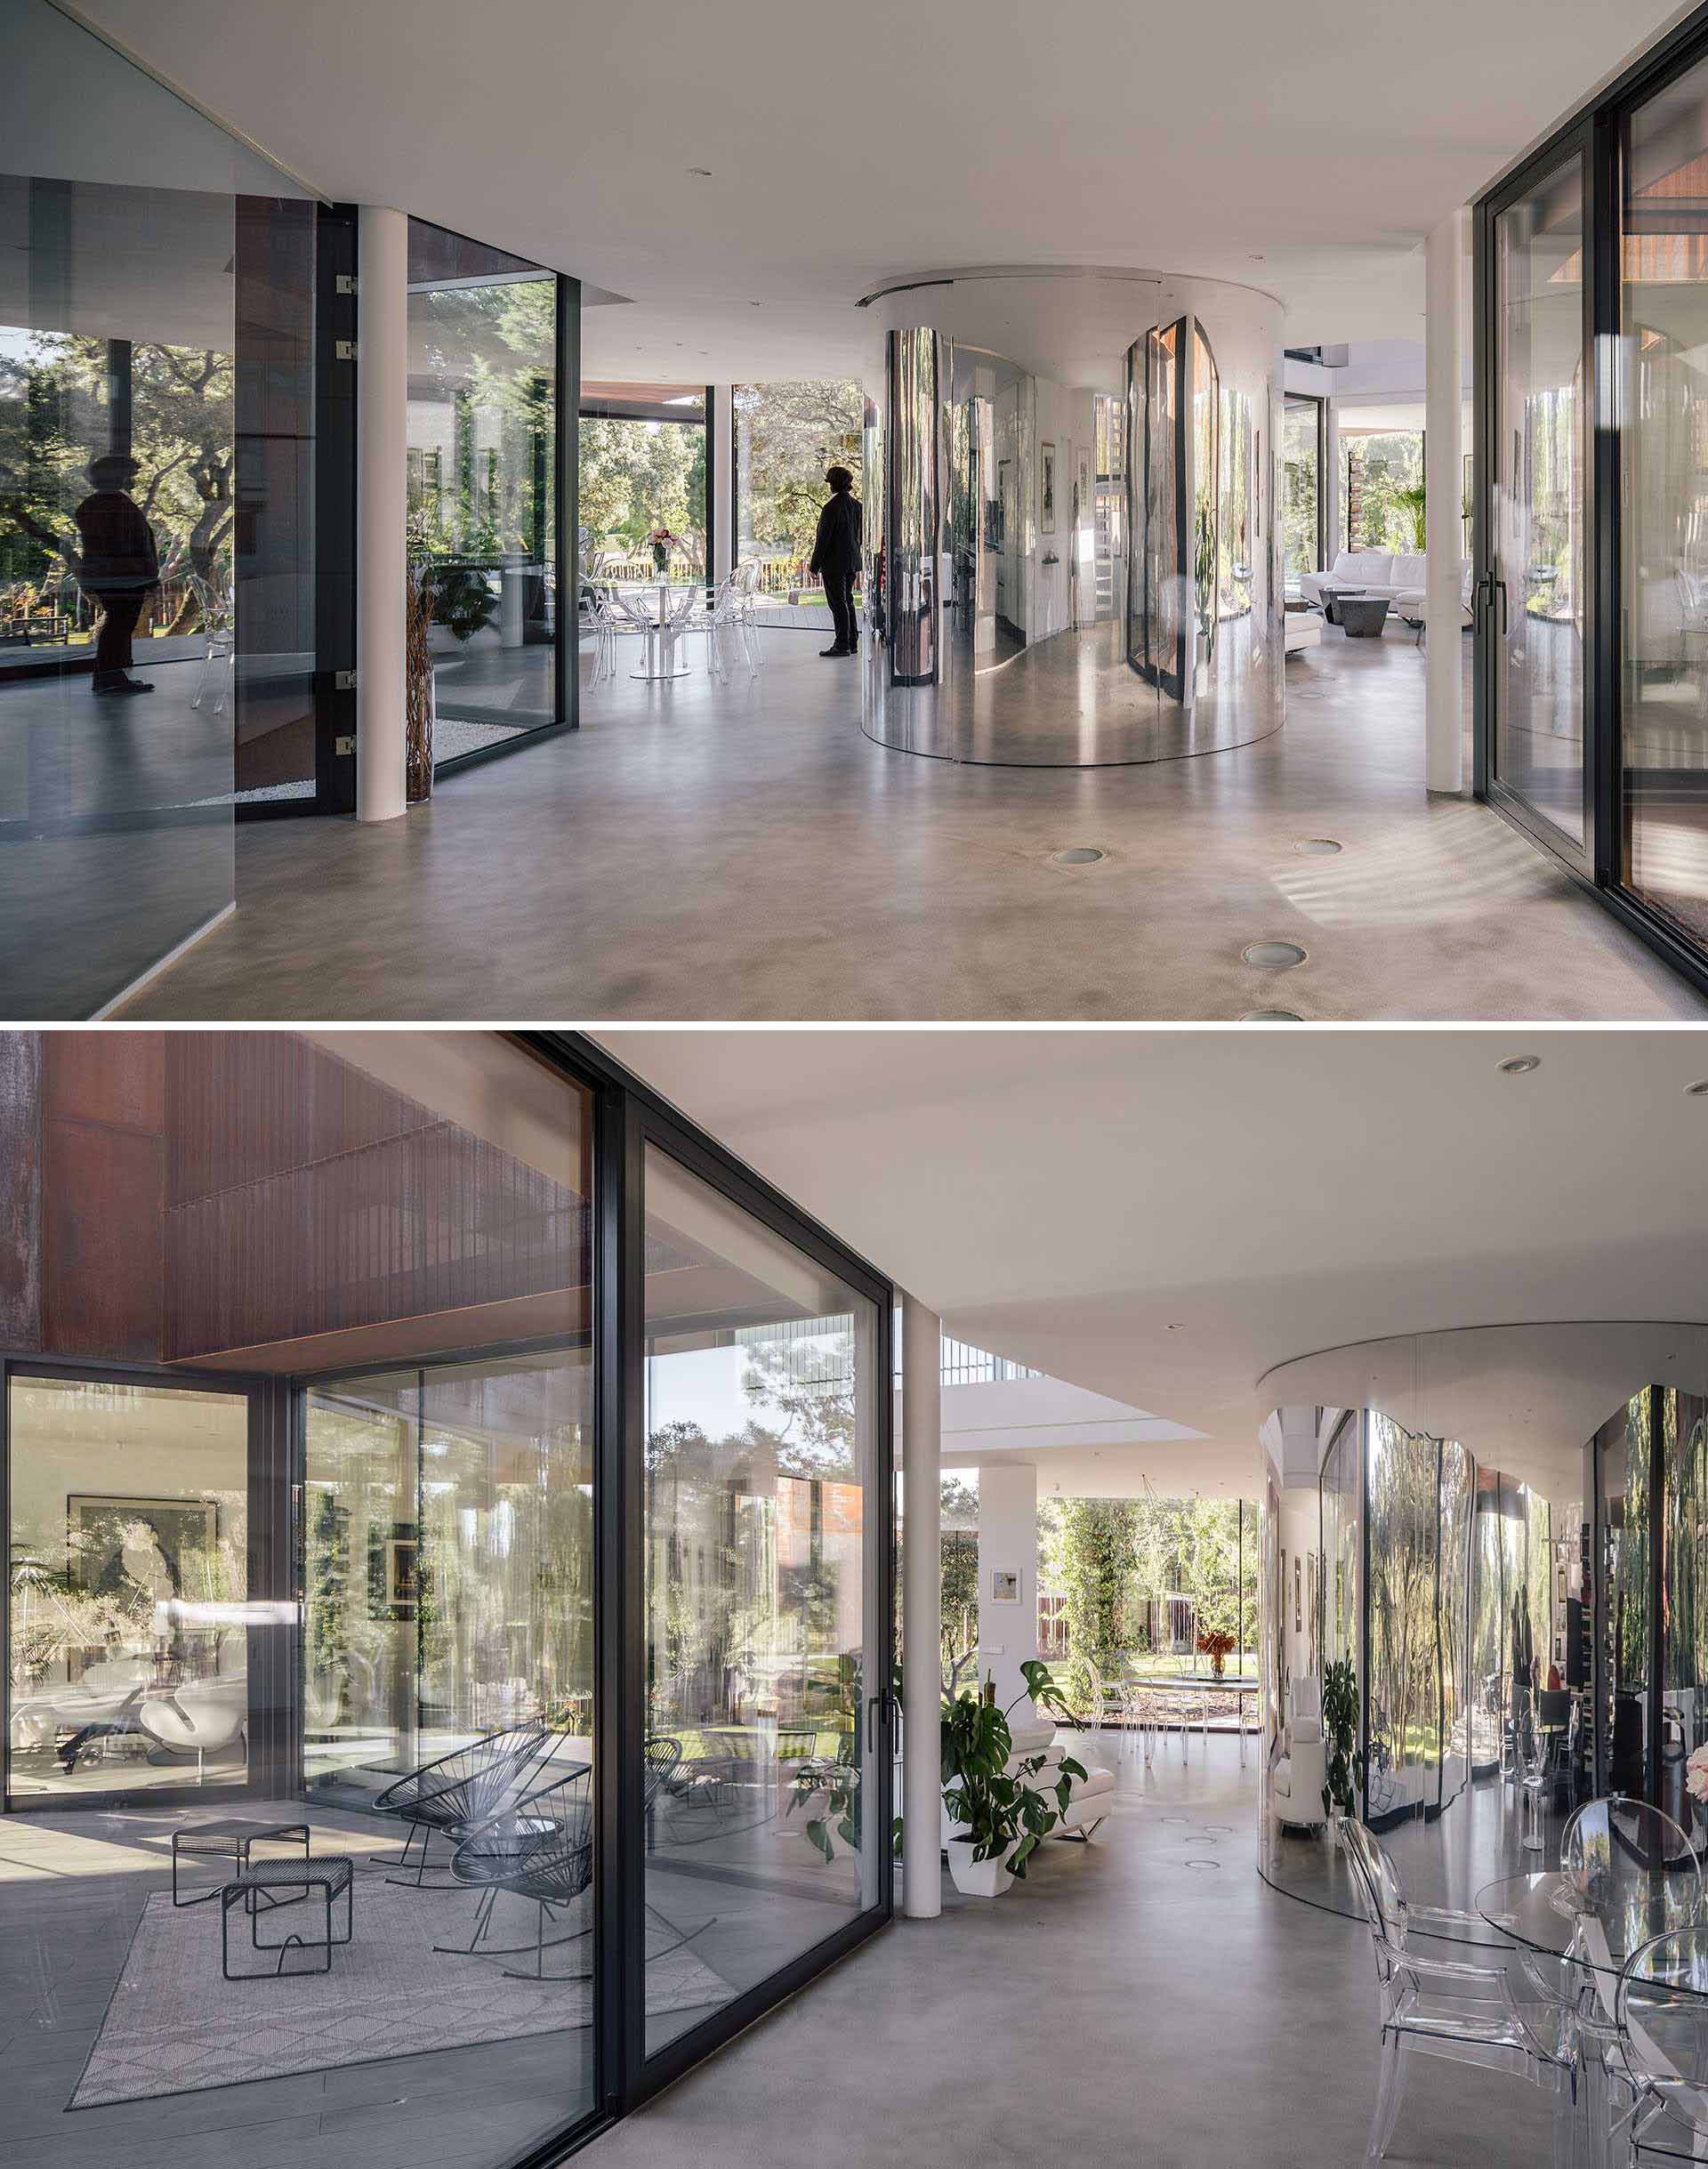 The interior of the home includes concrete floors, walls of glass, and a curved mirrored accent wall that reflects its surroundings.